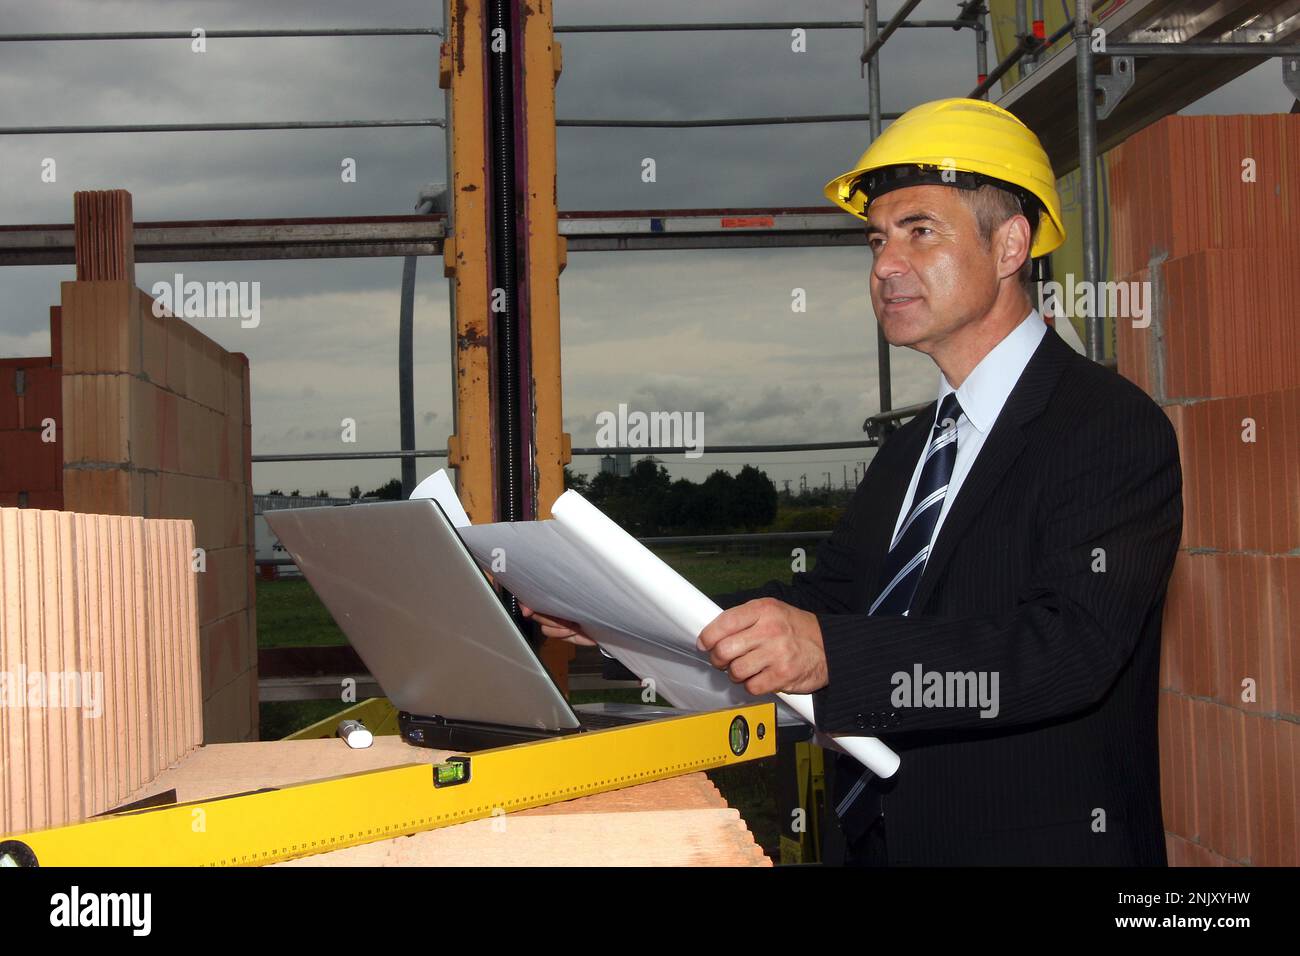 architects on the building site Stock Photo